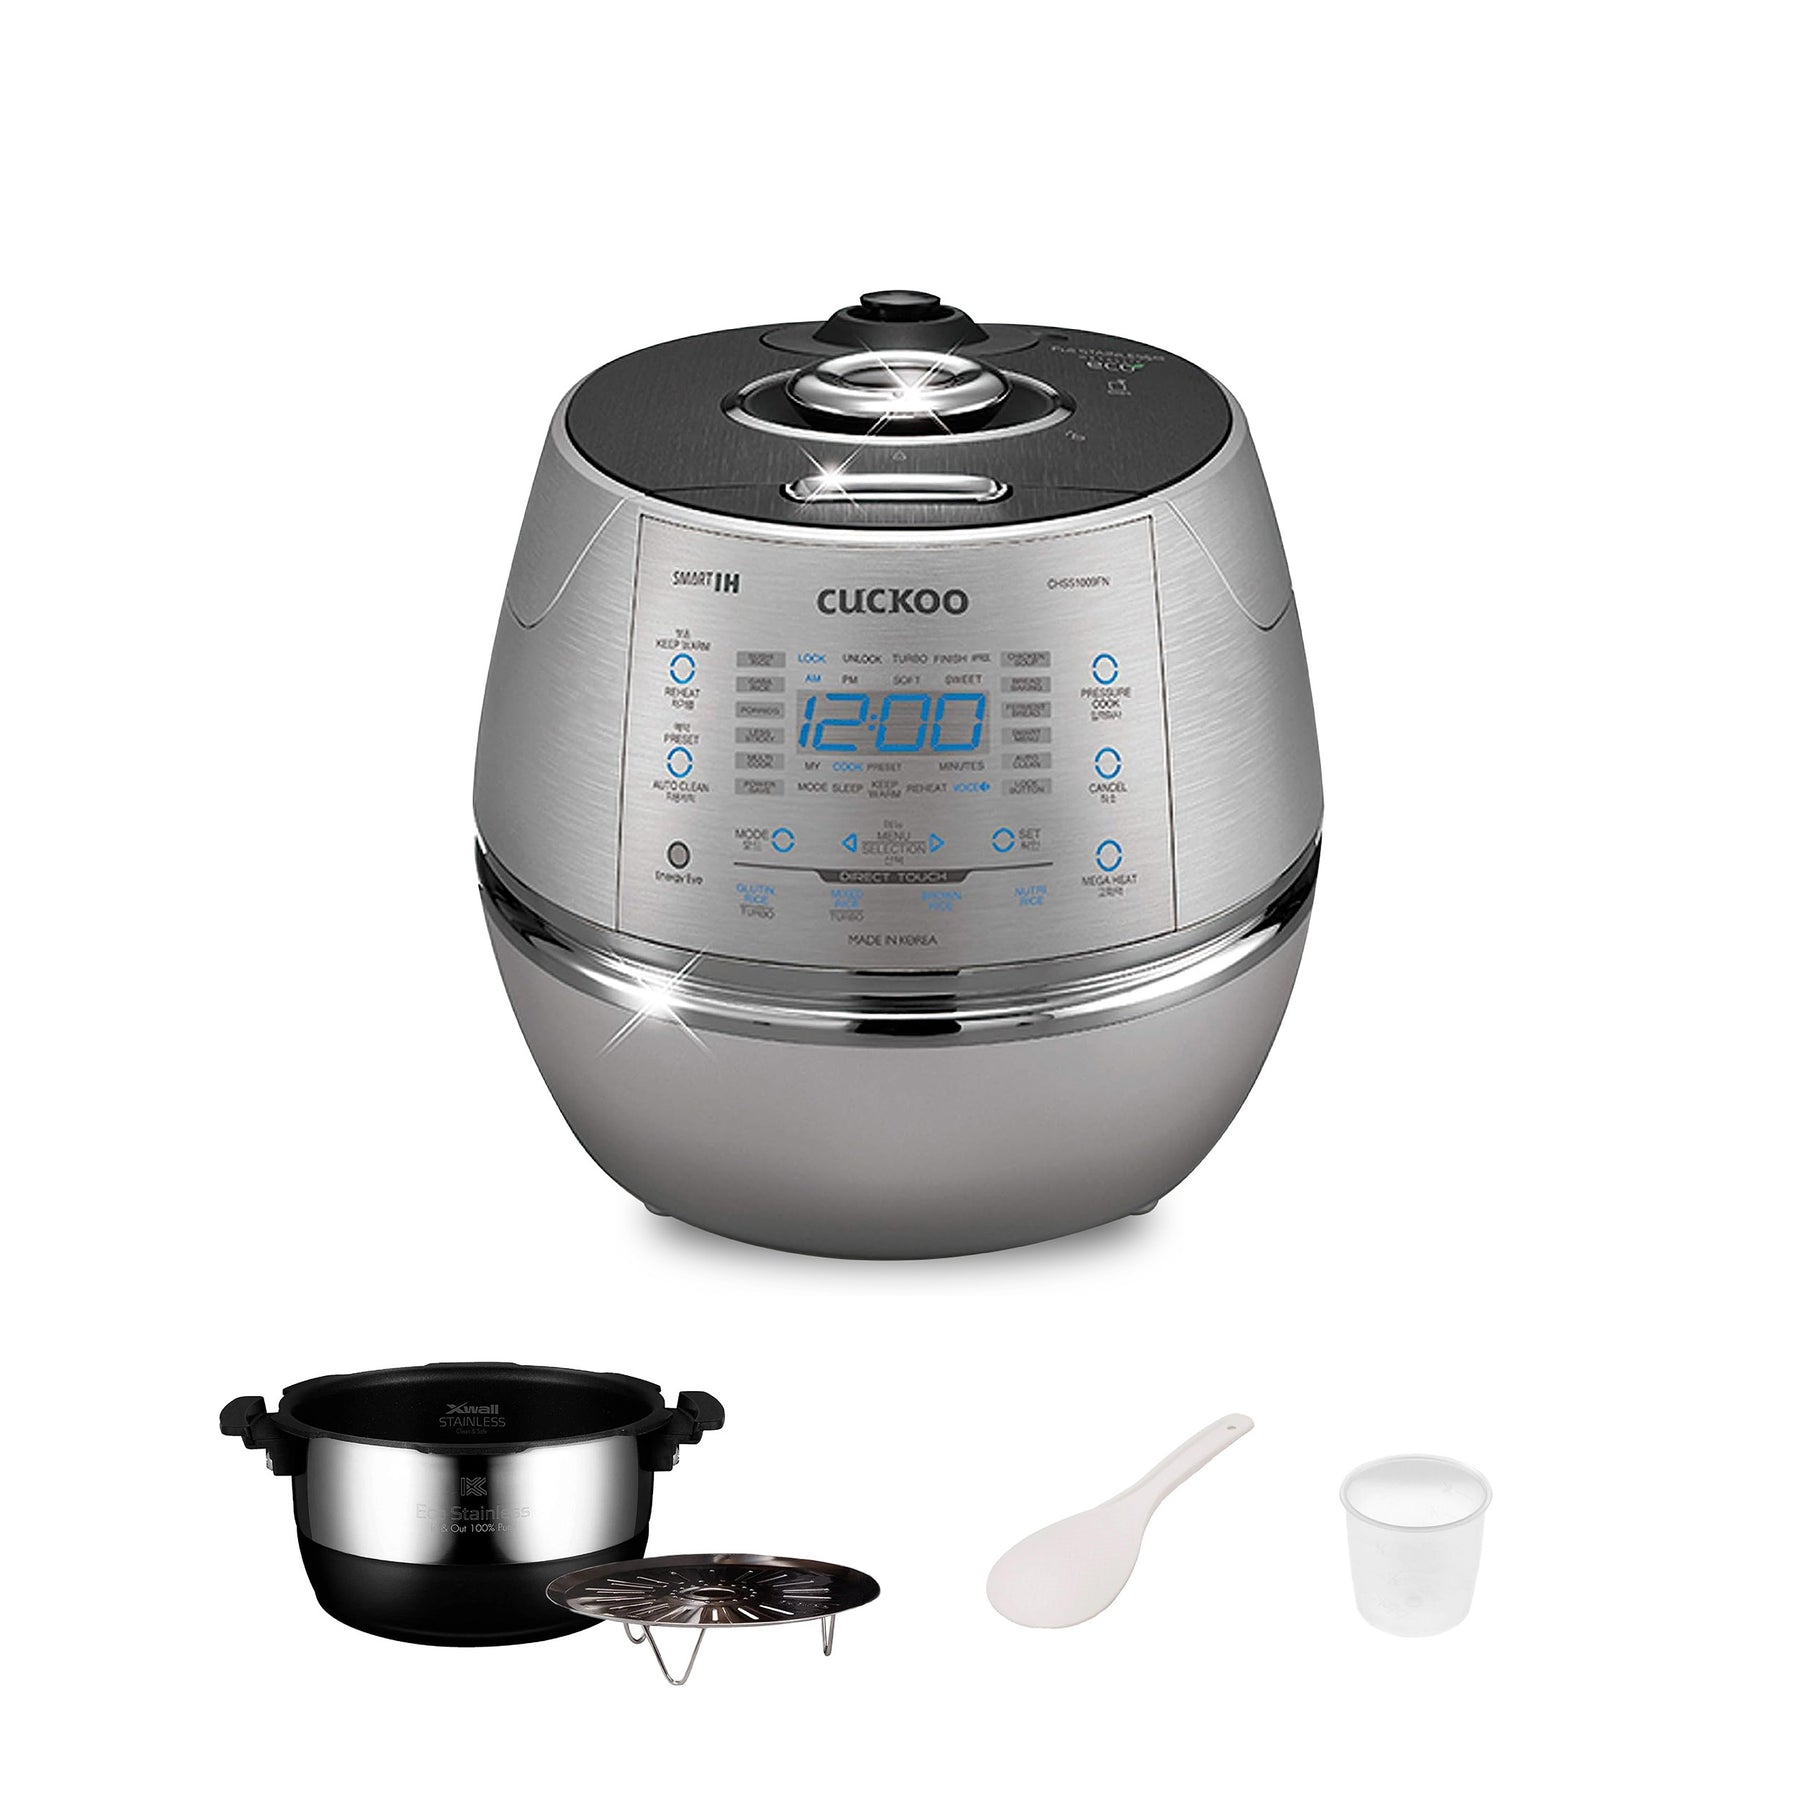 Cuckoo Electric Induction Heating Pressure Rice Cooker Crp-chss1009fn